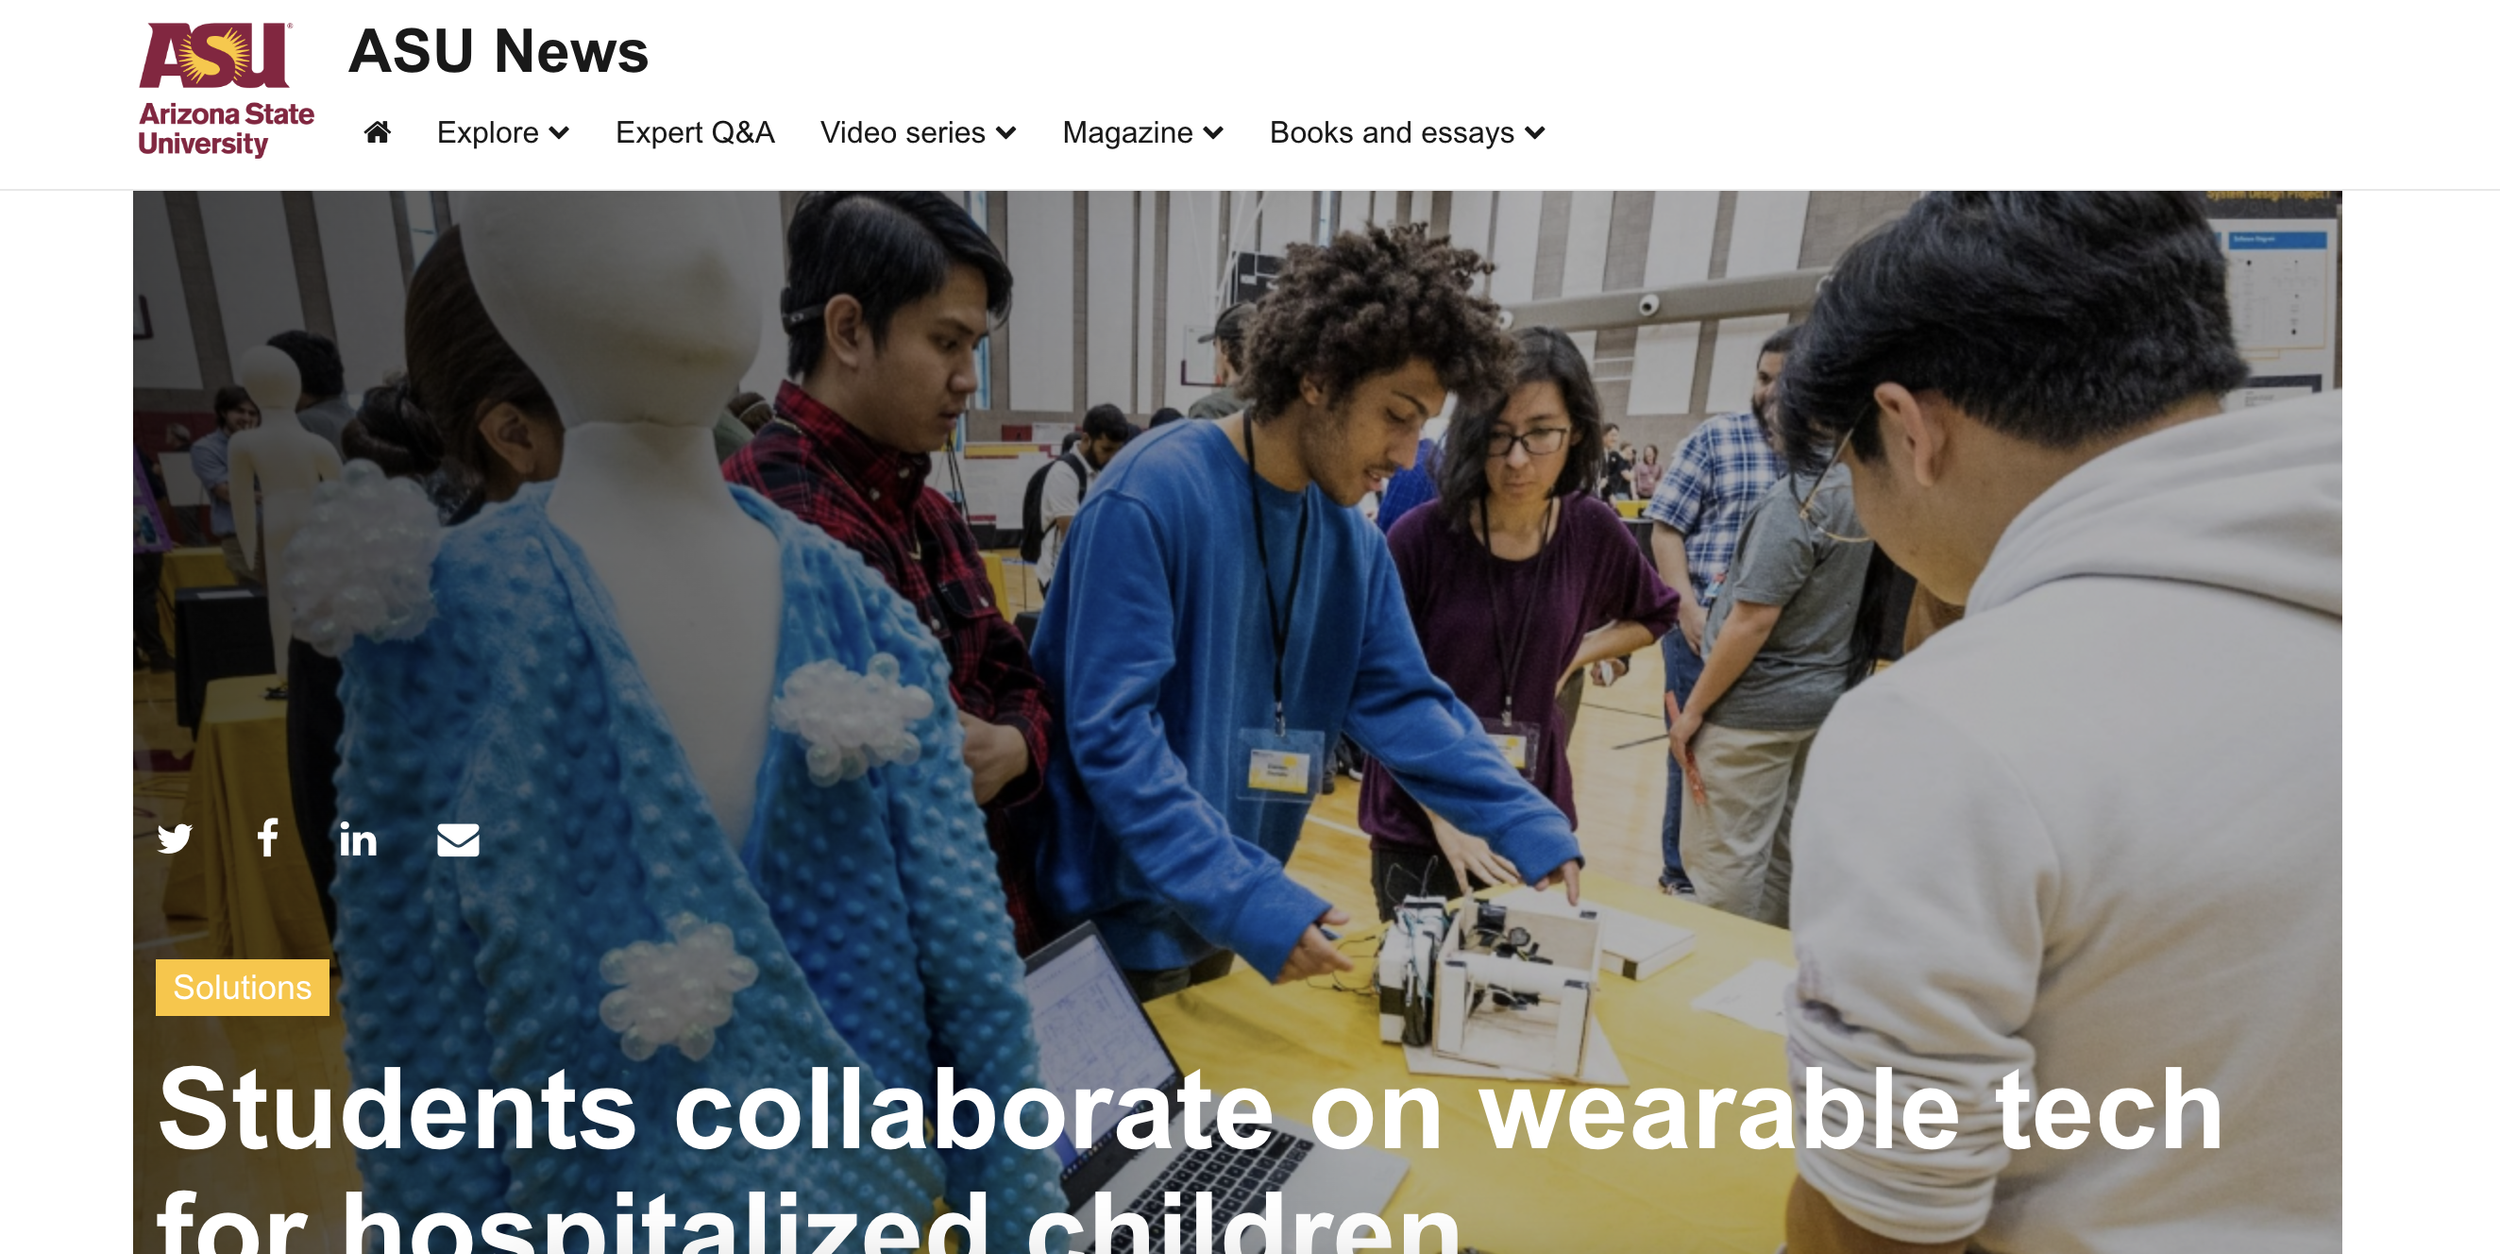 Students collaborate on wearable tech for hospitalized children (Copy)